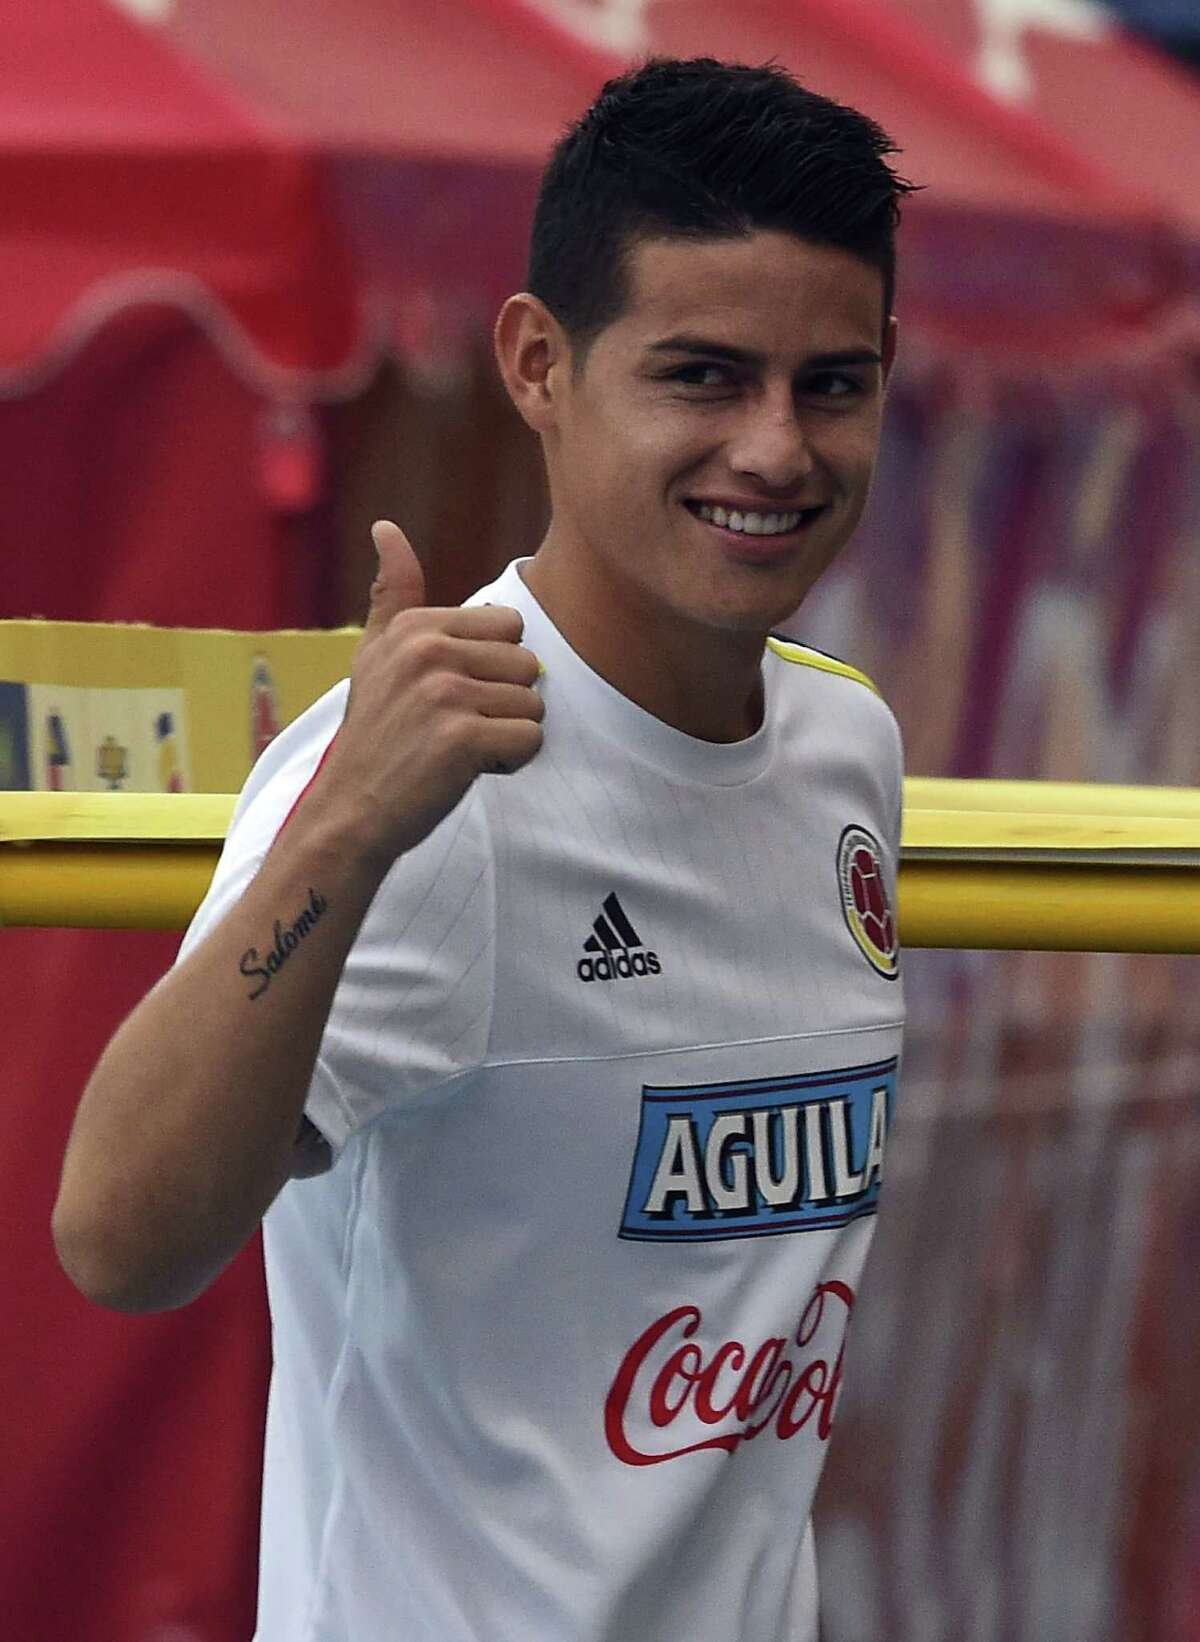 Colombia's national football team player, James Rodriguez smiles during a training session at the Metropolitano Stadium in Barranquilla on March 26, 2016. Colombia will face Ecuador on March 29 in Barranquilla in a FIFA World Cup Russia 2018 South American qualifier. AFP PHOTO/Luis AcostaLUIS ACOSTA/AFP/Getty Images